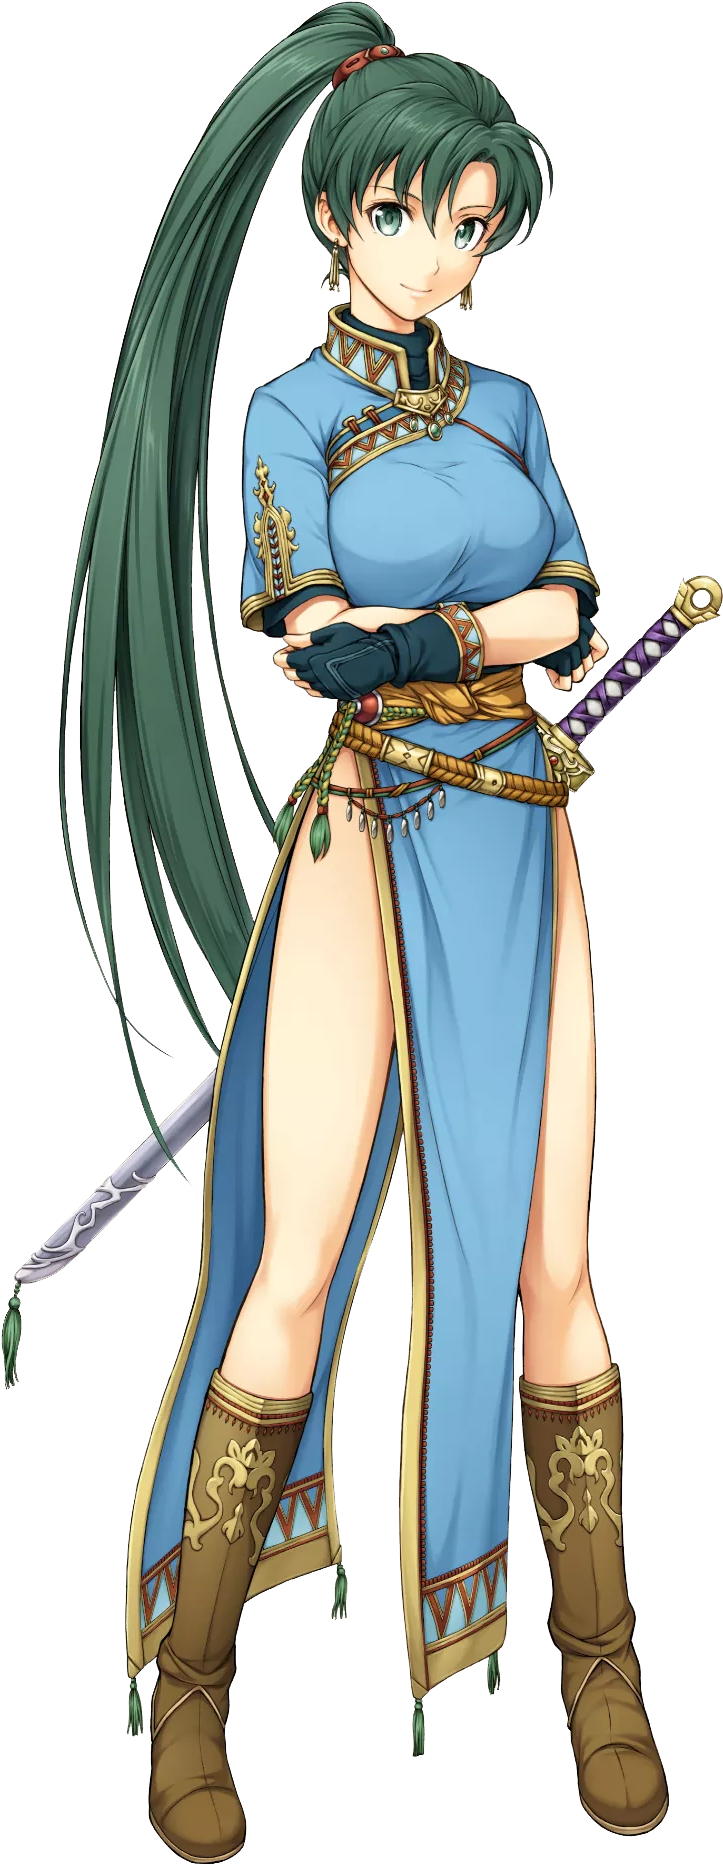 Legs For Days, Though They Work Against Her For This - Fire Emblem Heroes Lyn Build (1600x1920)